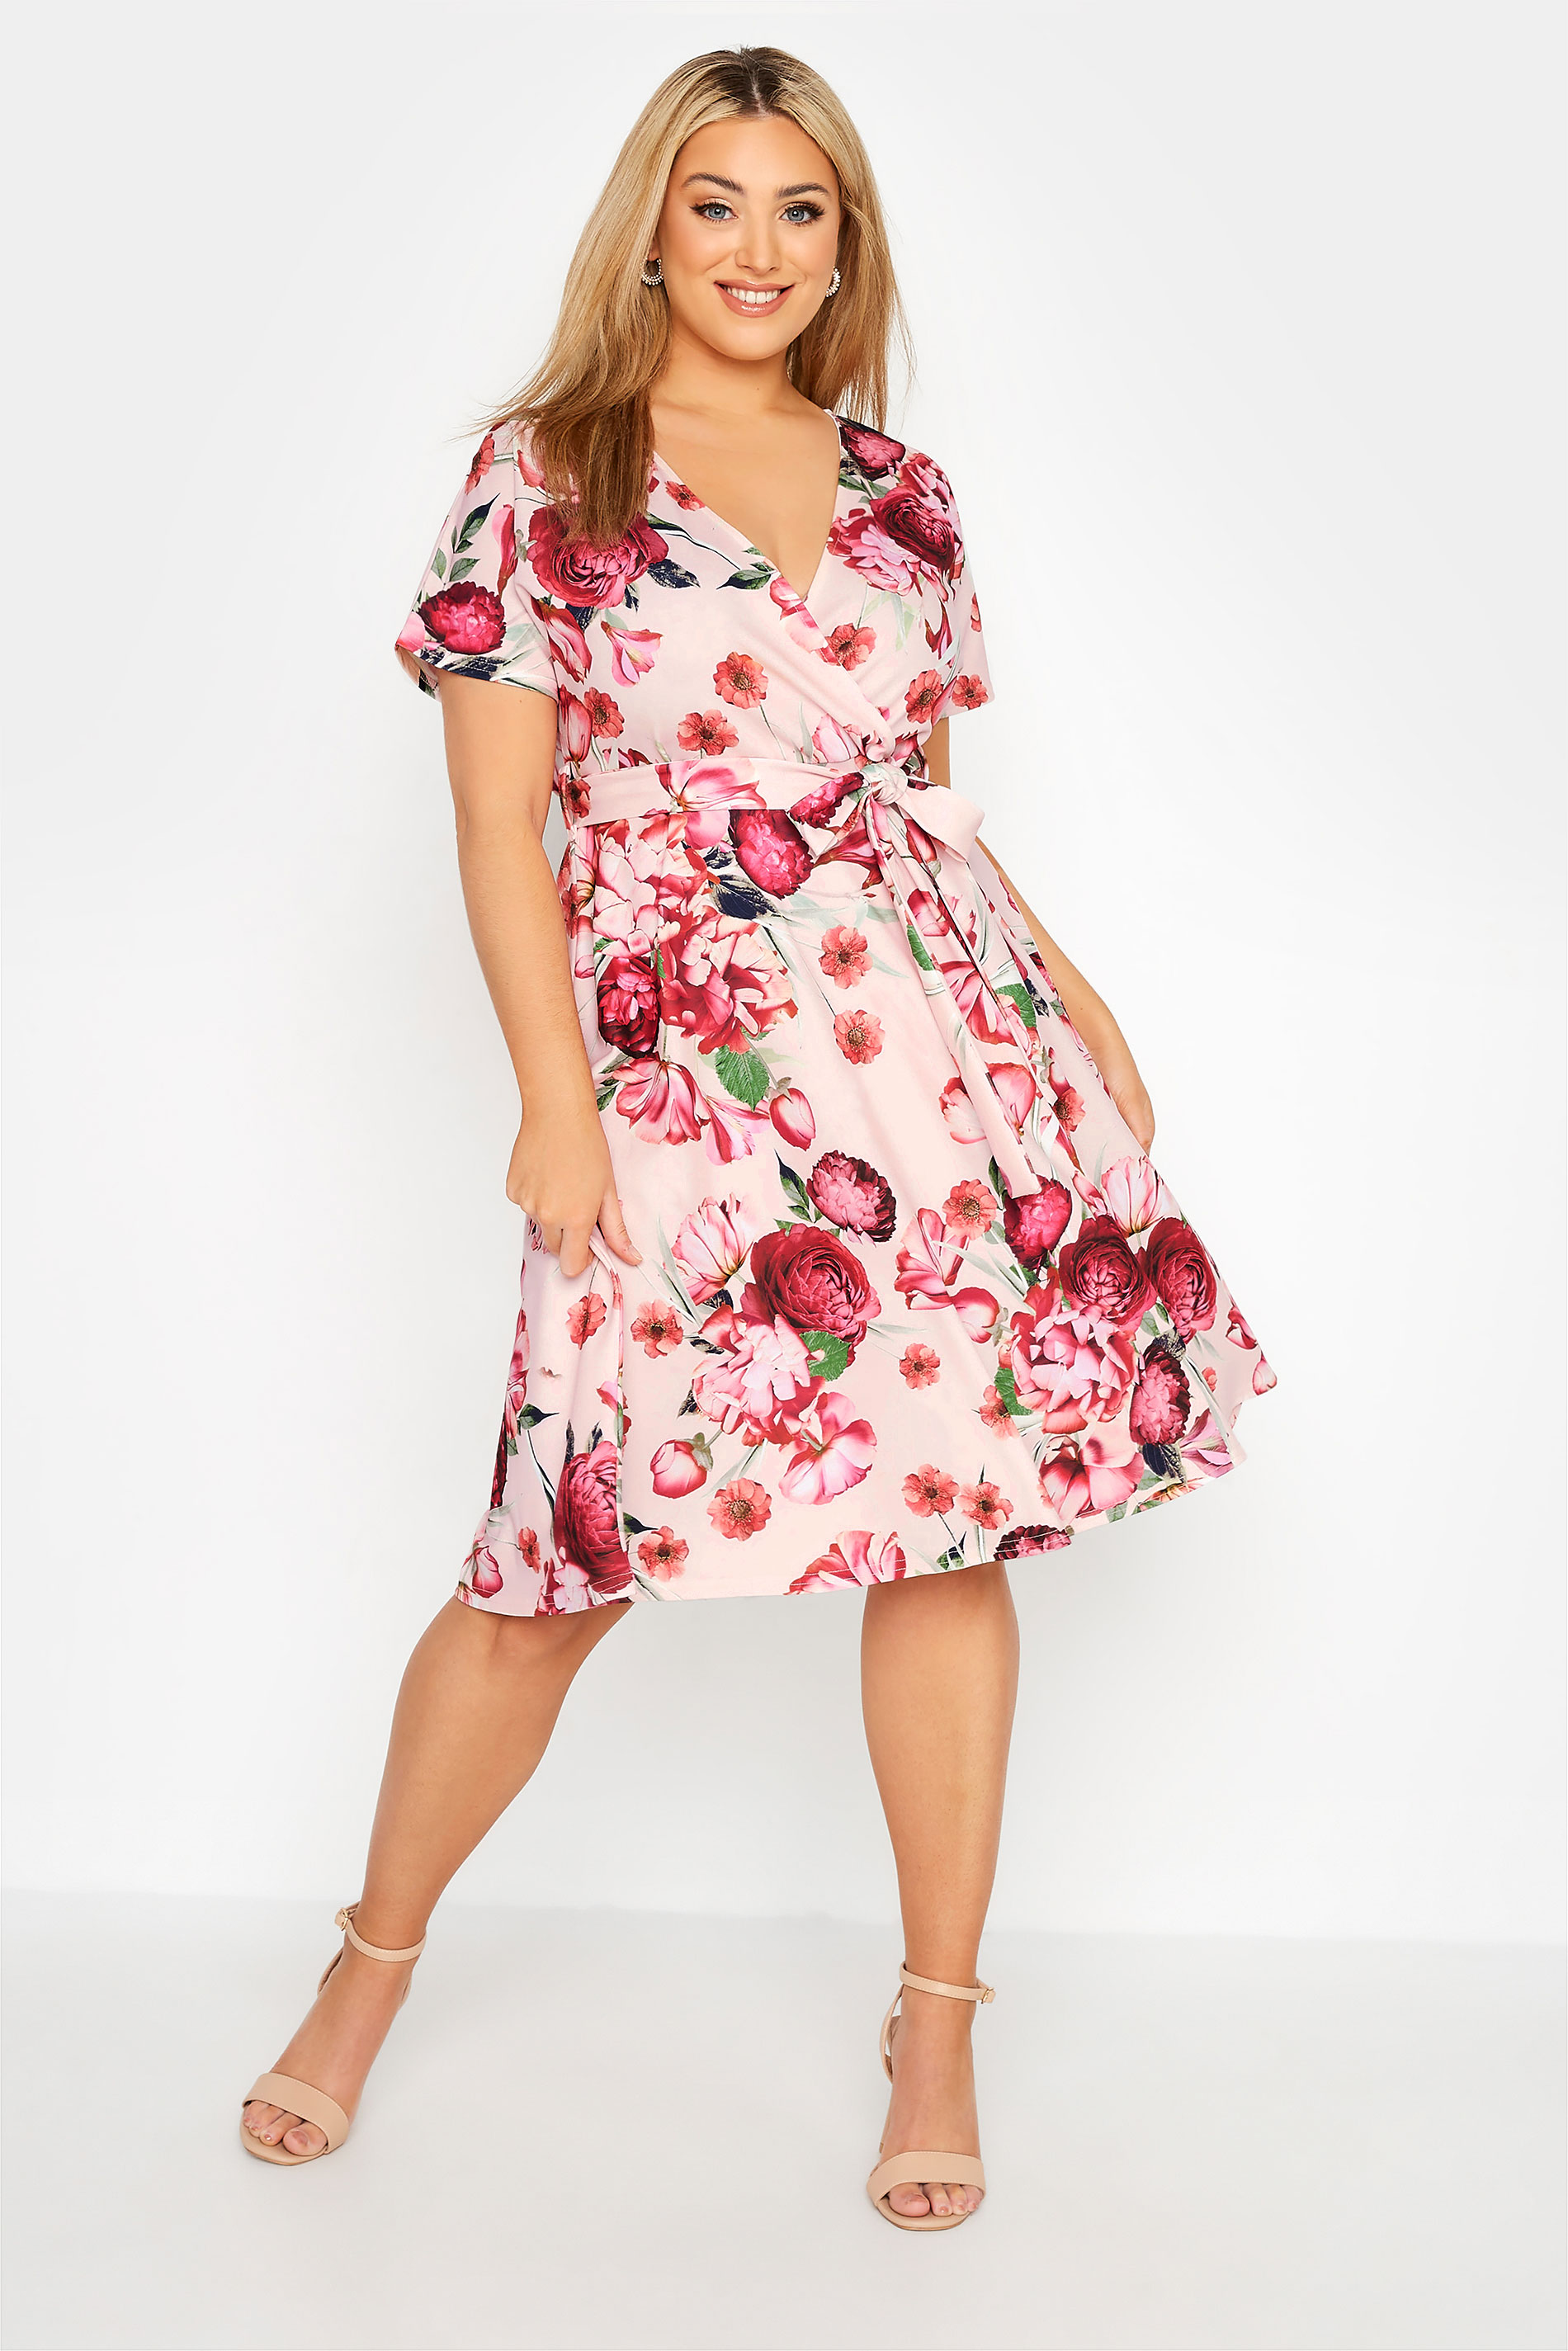 Robes Grande Taille Grande taille  Robes Imprimé Floral | YOURS LONDON - Robe Rose Poudré & Fushia Floral Cache-Coeur - TF55094